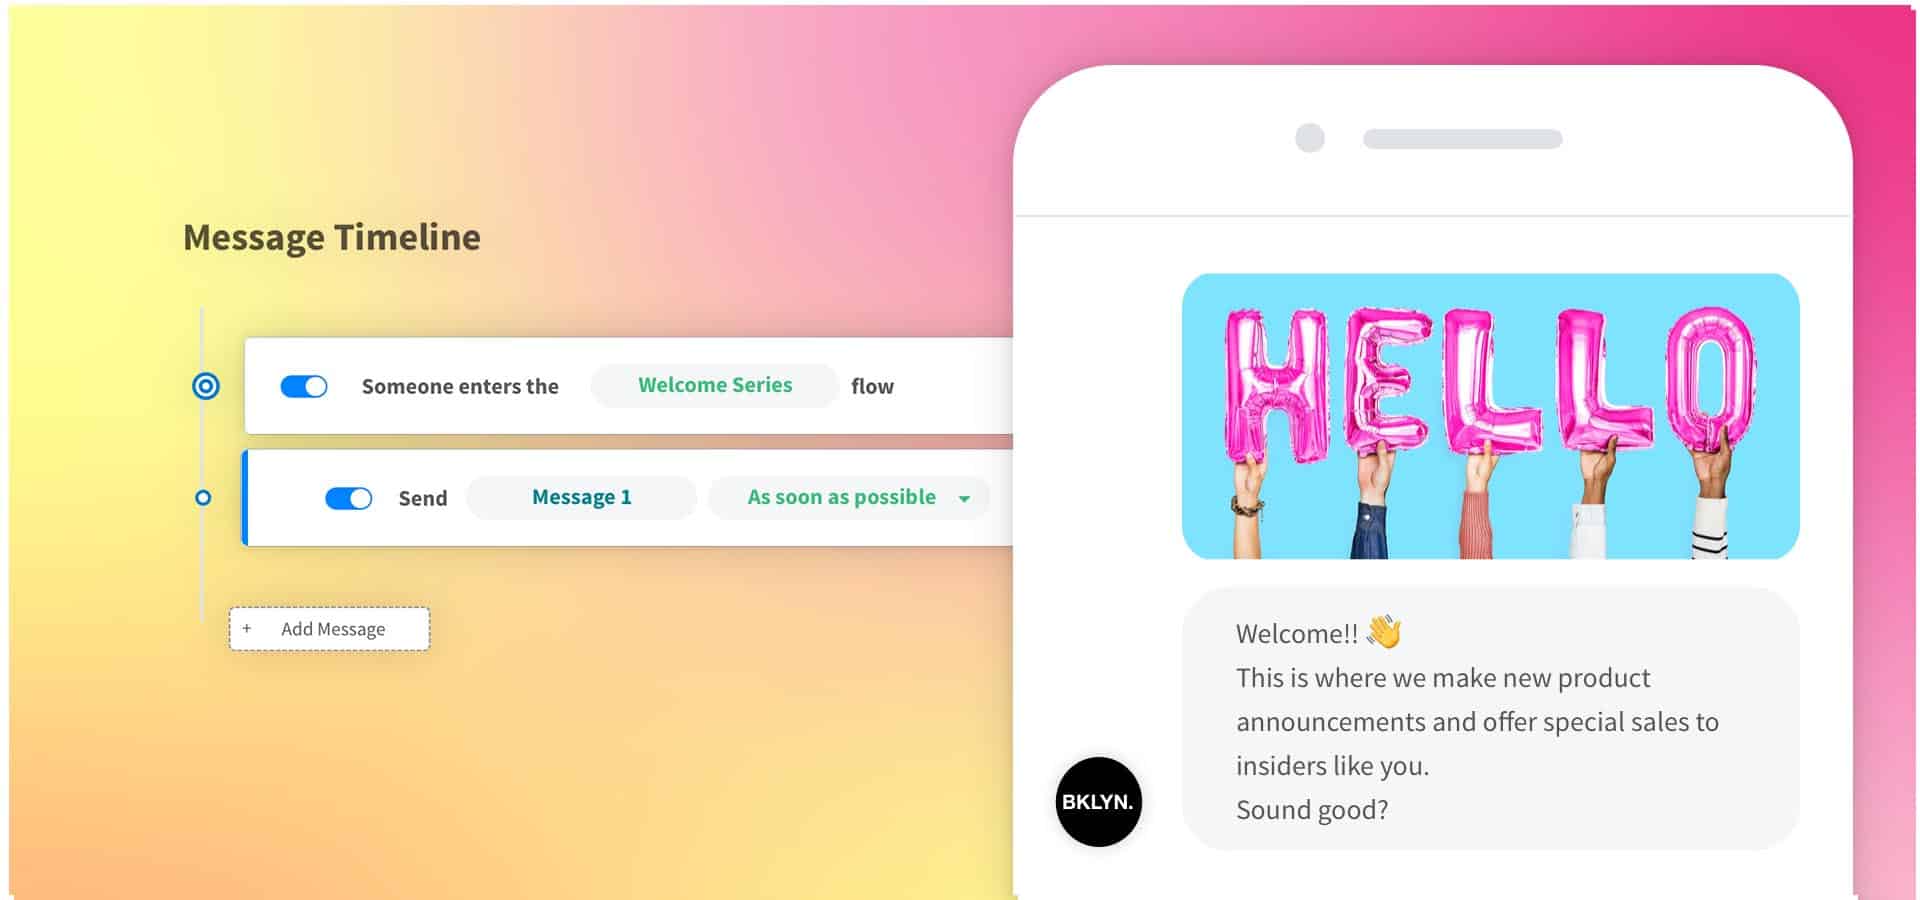 An abstract representation of UI elements from the ShopMessage product that describes the message flow rules and messages. A minimalist cellphone illustration shows a welcome conversation. The first message is a photo of five hands, each holding up a pink balloon letter that collectively spells out the word 